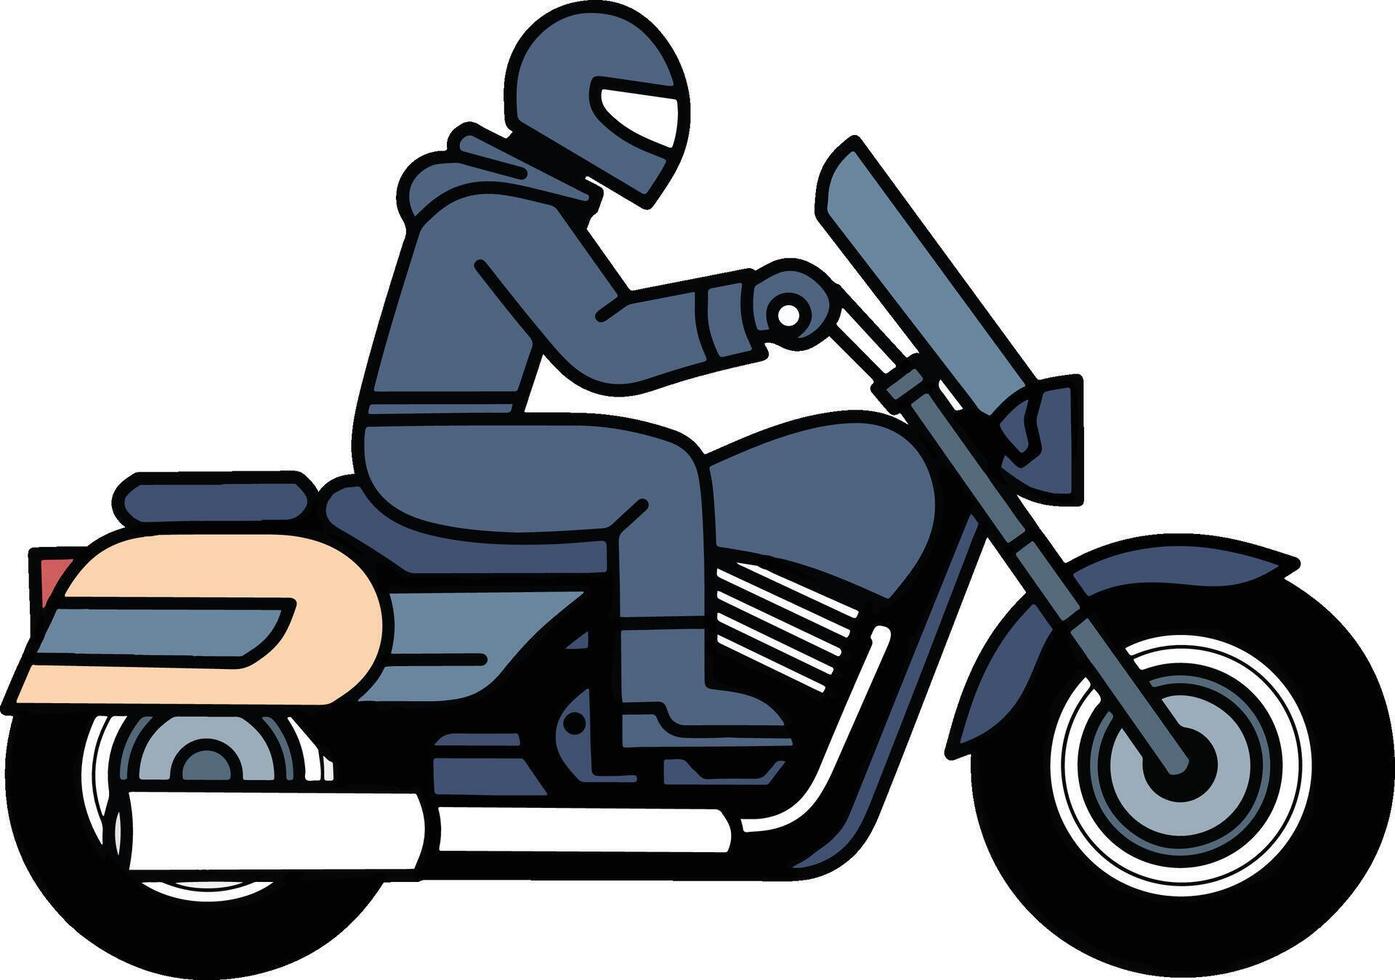 people riding motorcycle illustration vector